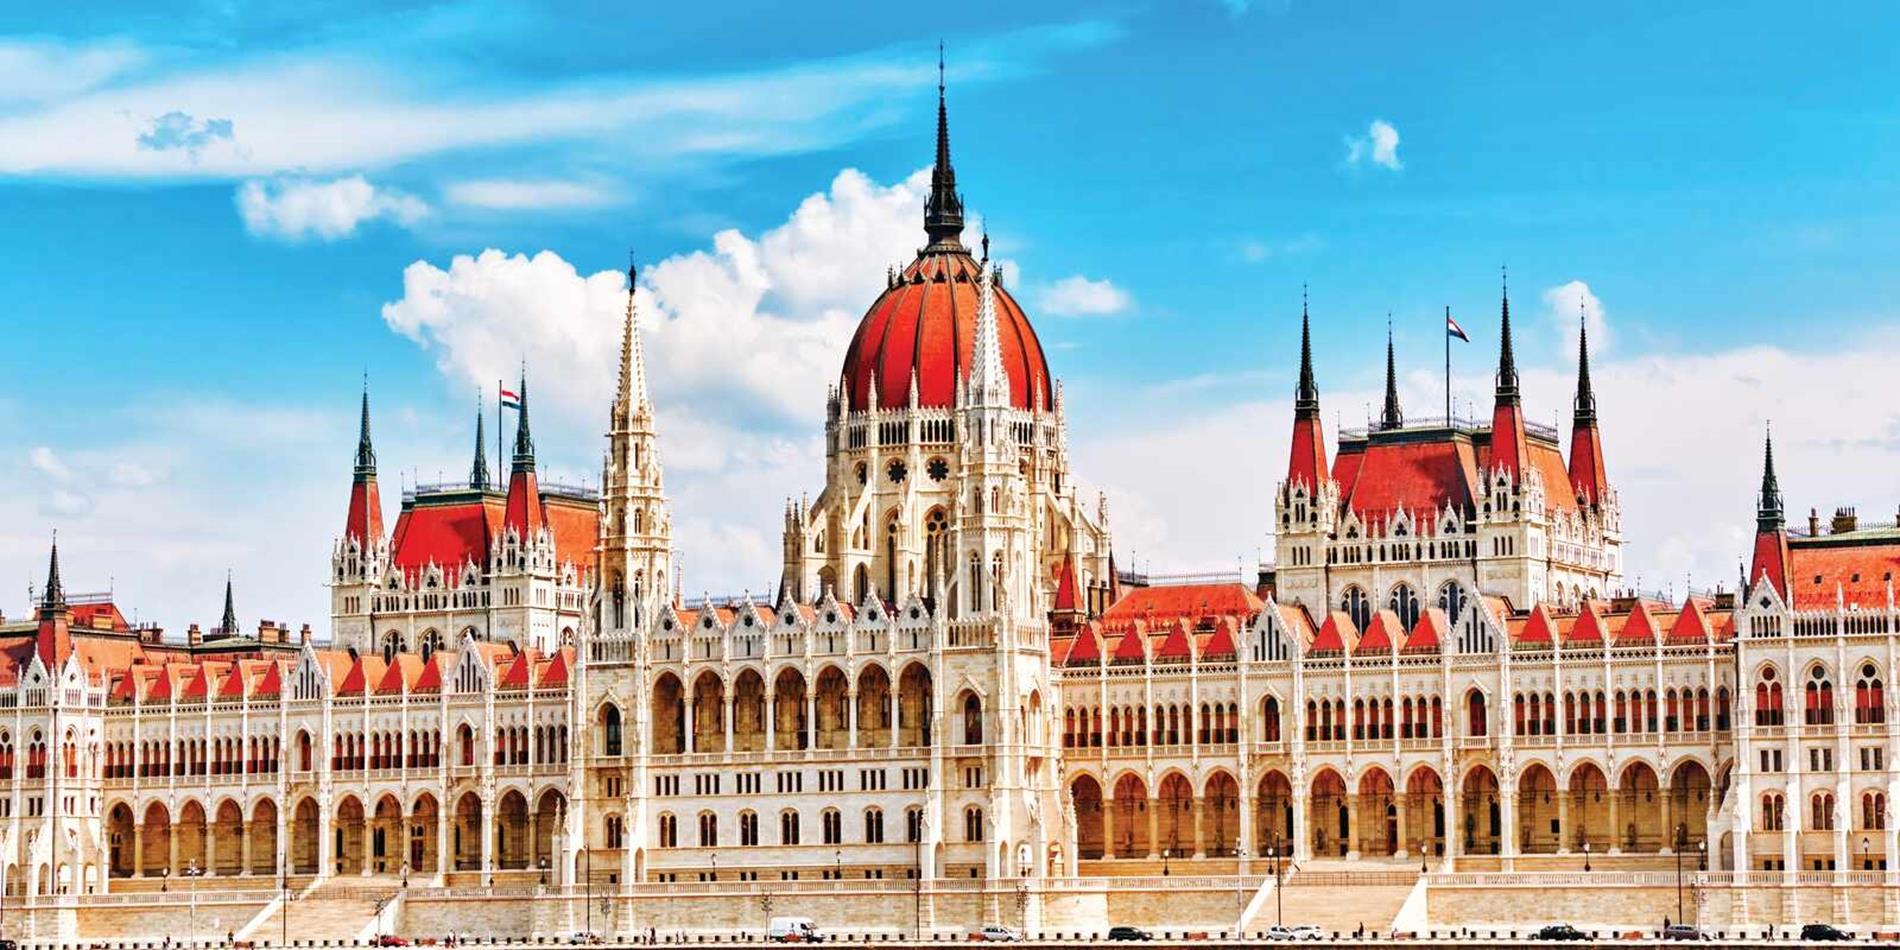 Cost of Living Analysis for Students in Hungary